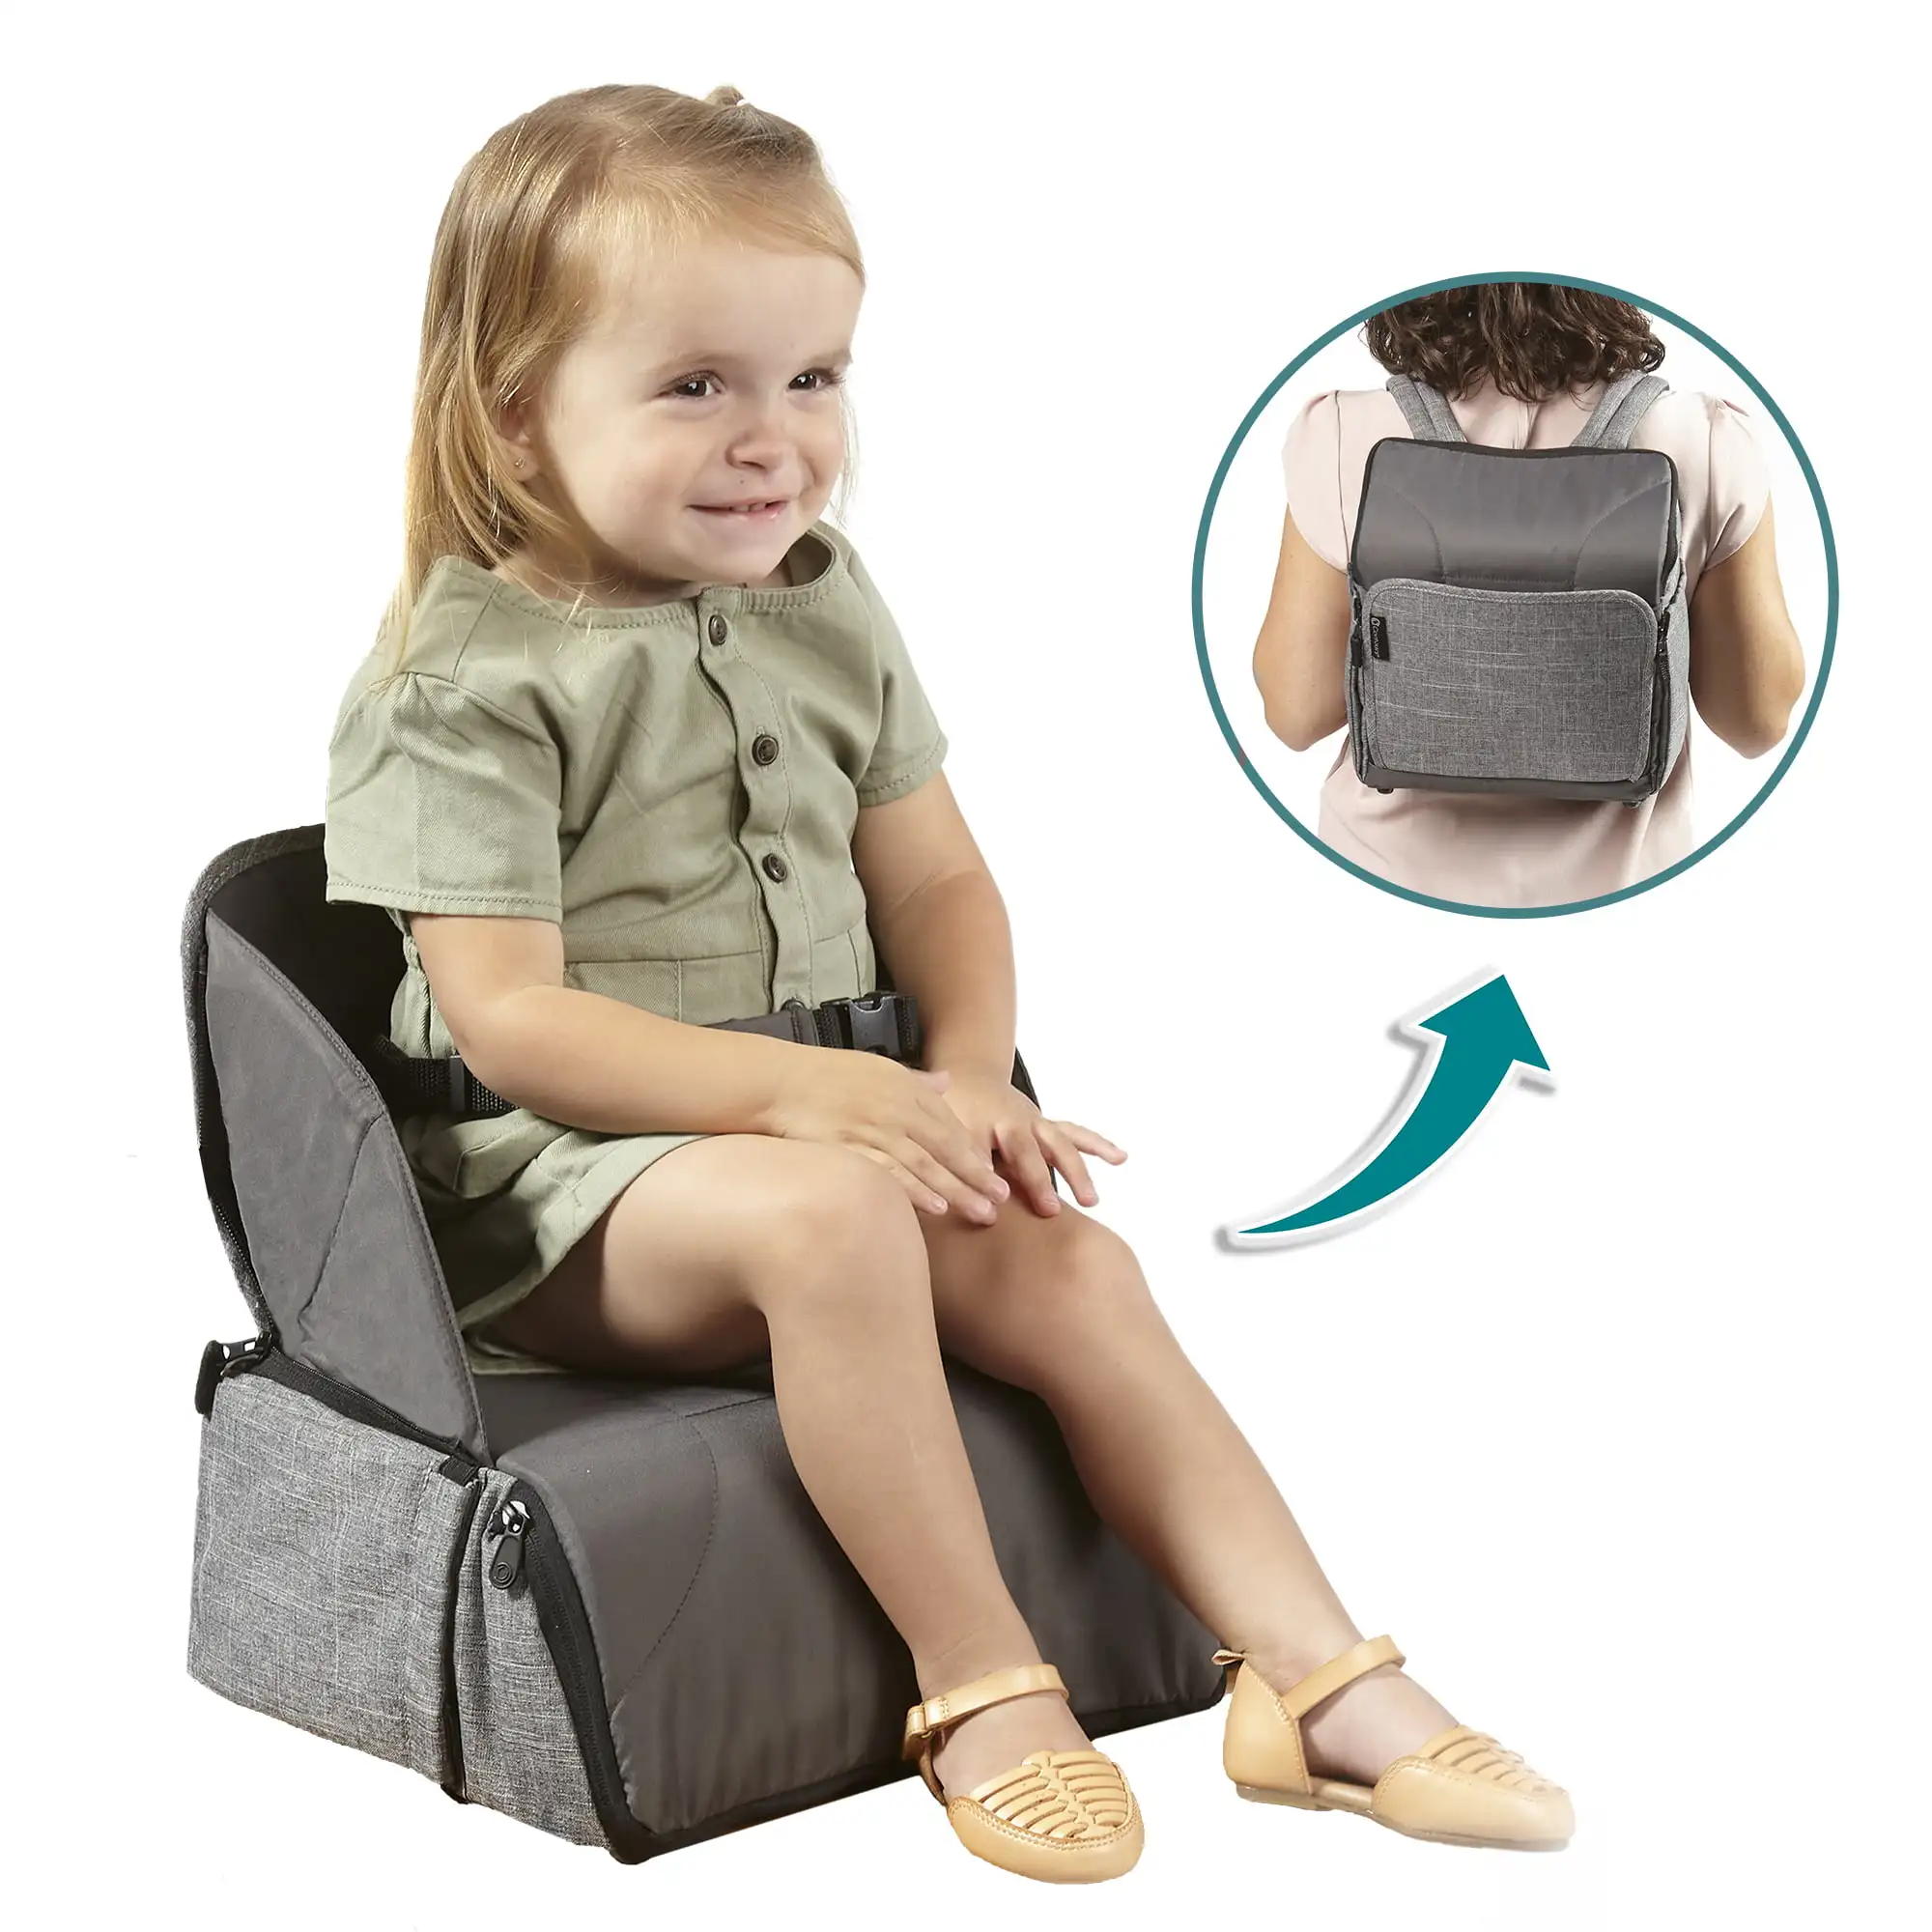 Explore 2-in-1 Portable Booster Seat and Diaper Bag,Machine Washable,Lightweight,Sturdy Feeding Booster,Grey Backpack Diaper Bag